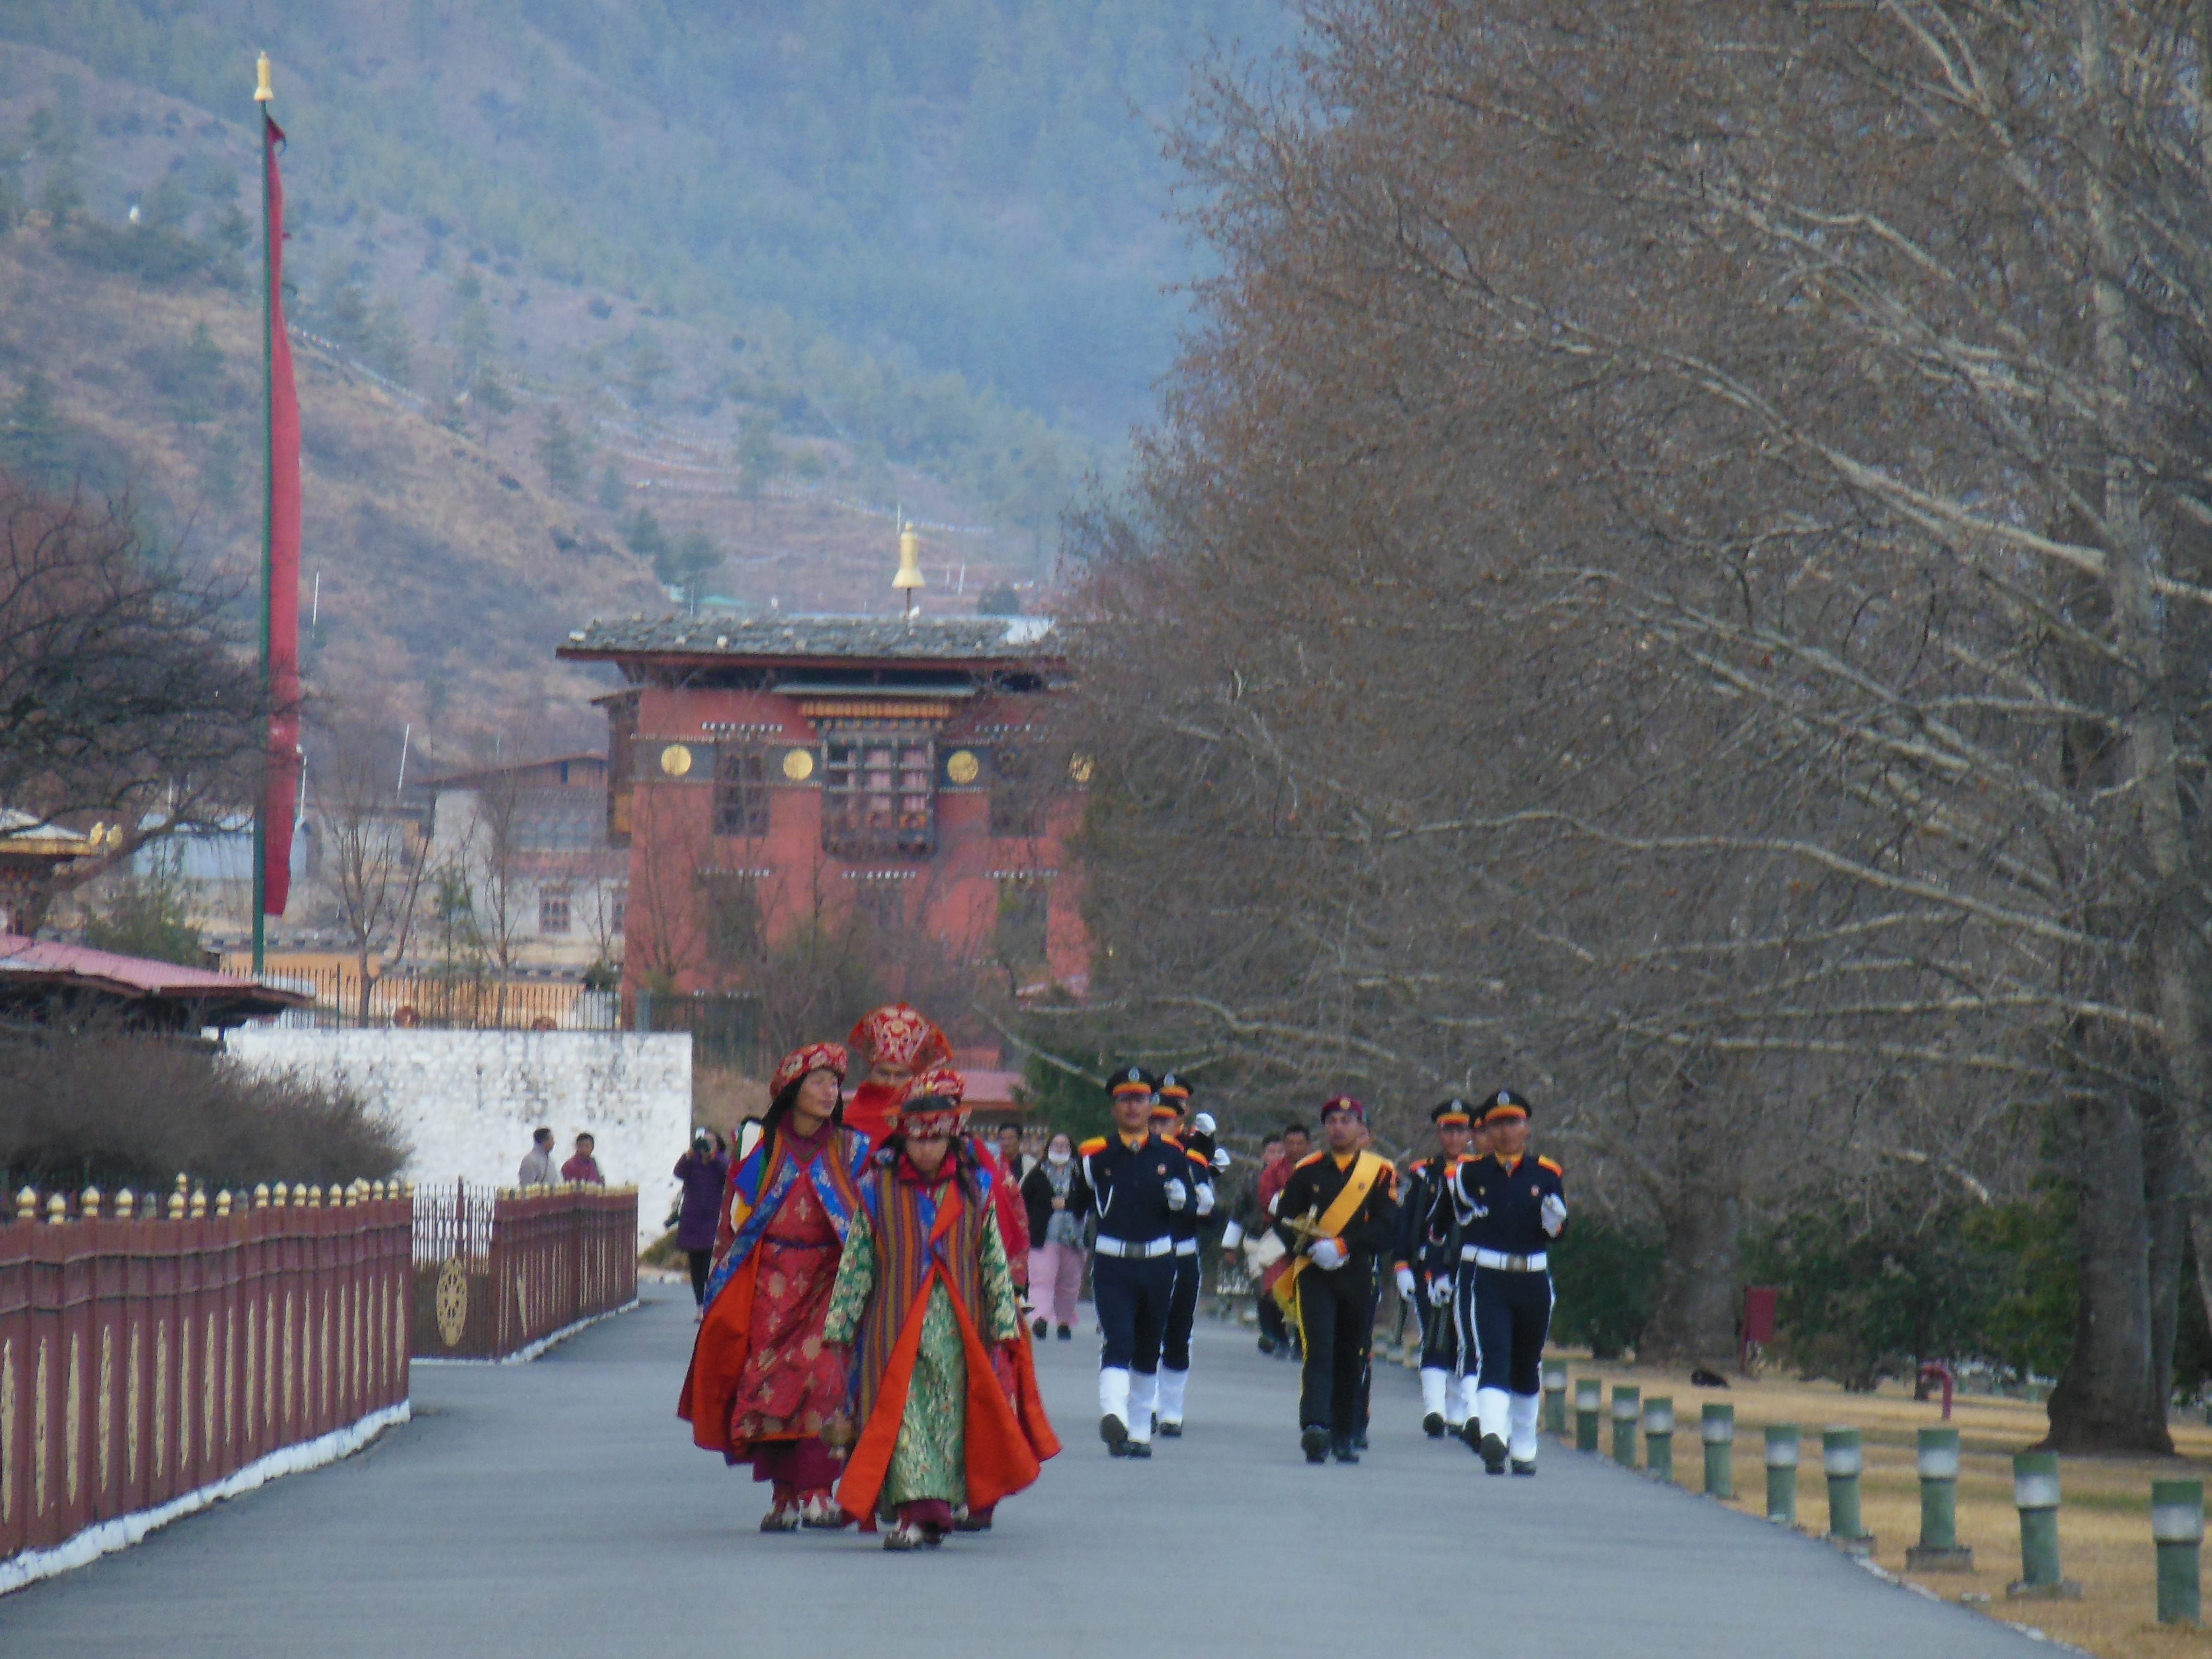 At sunset every evening, soldiers march and lower the Bhutanese flag in front of Trashichho Dzong, whilst the priests accompany for chanting & playing a tune. This Dzong is the seat of the government since 1952, and the residence of the Royal family of Bhutan.